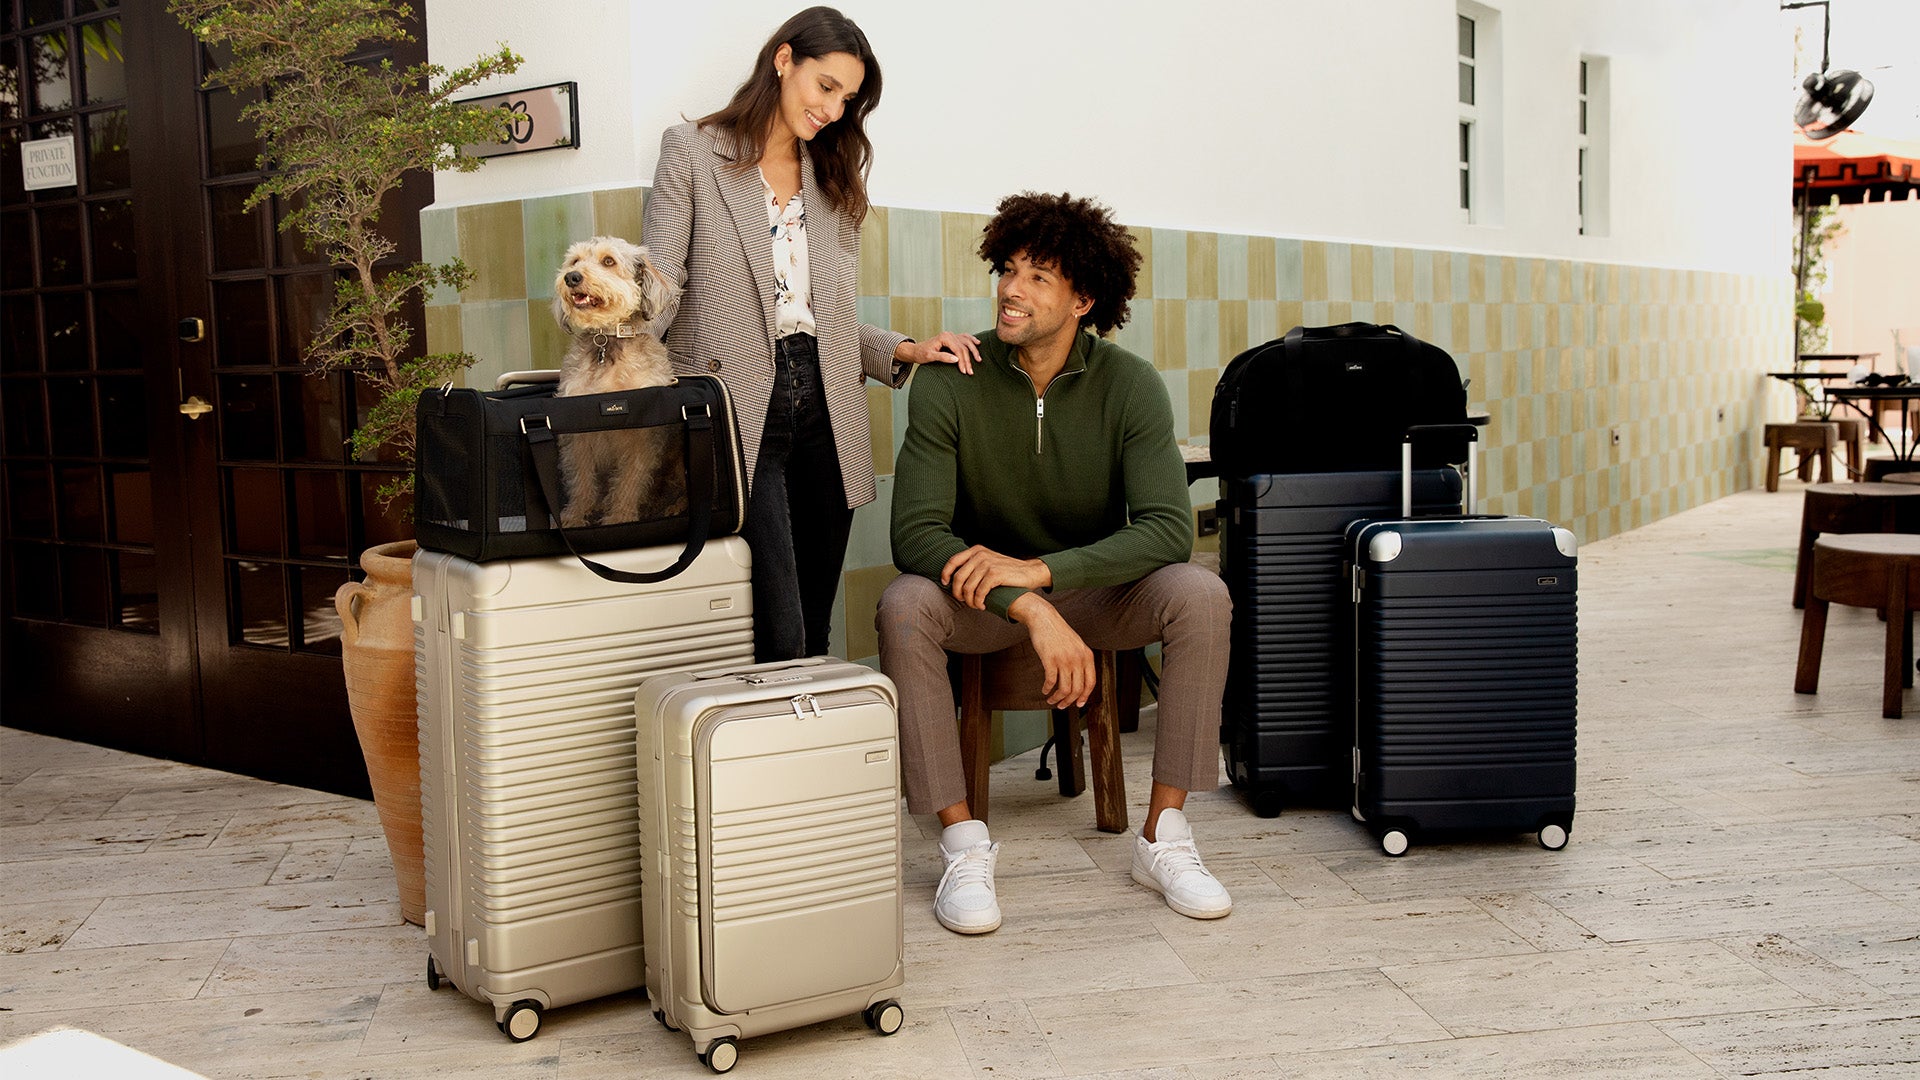 man and woman surrounded by luggage and pet carrier